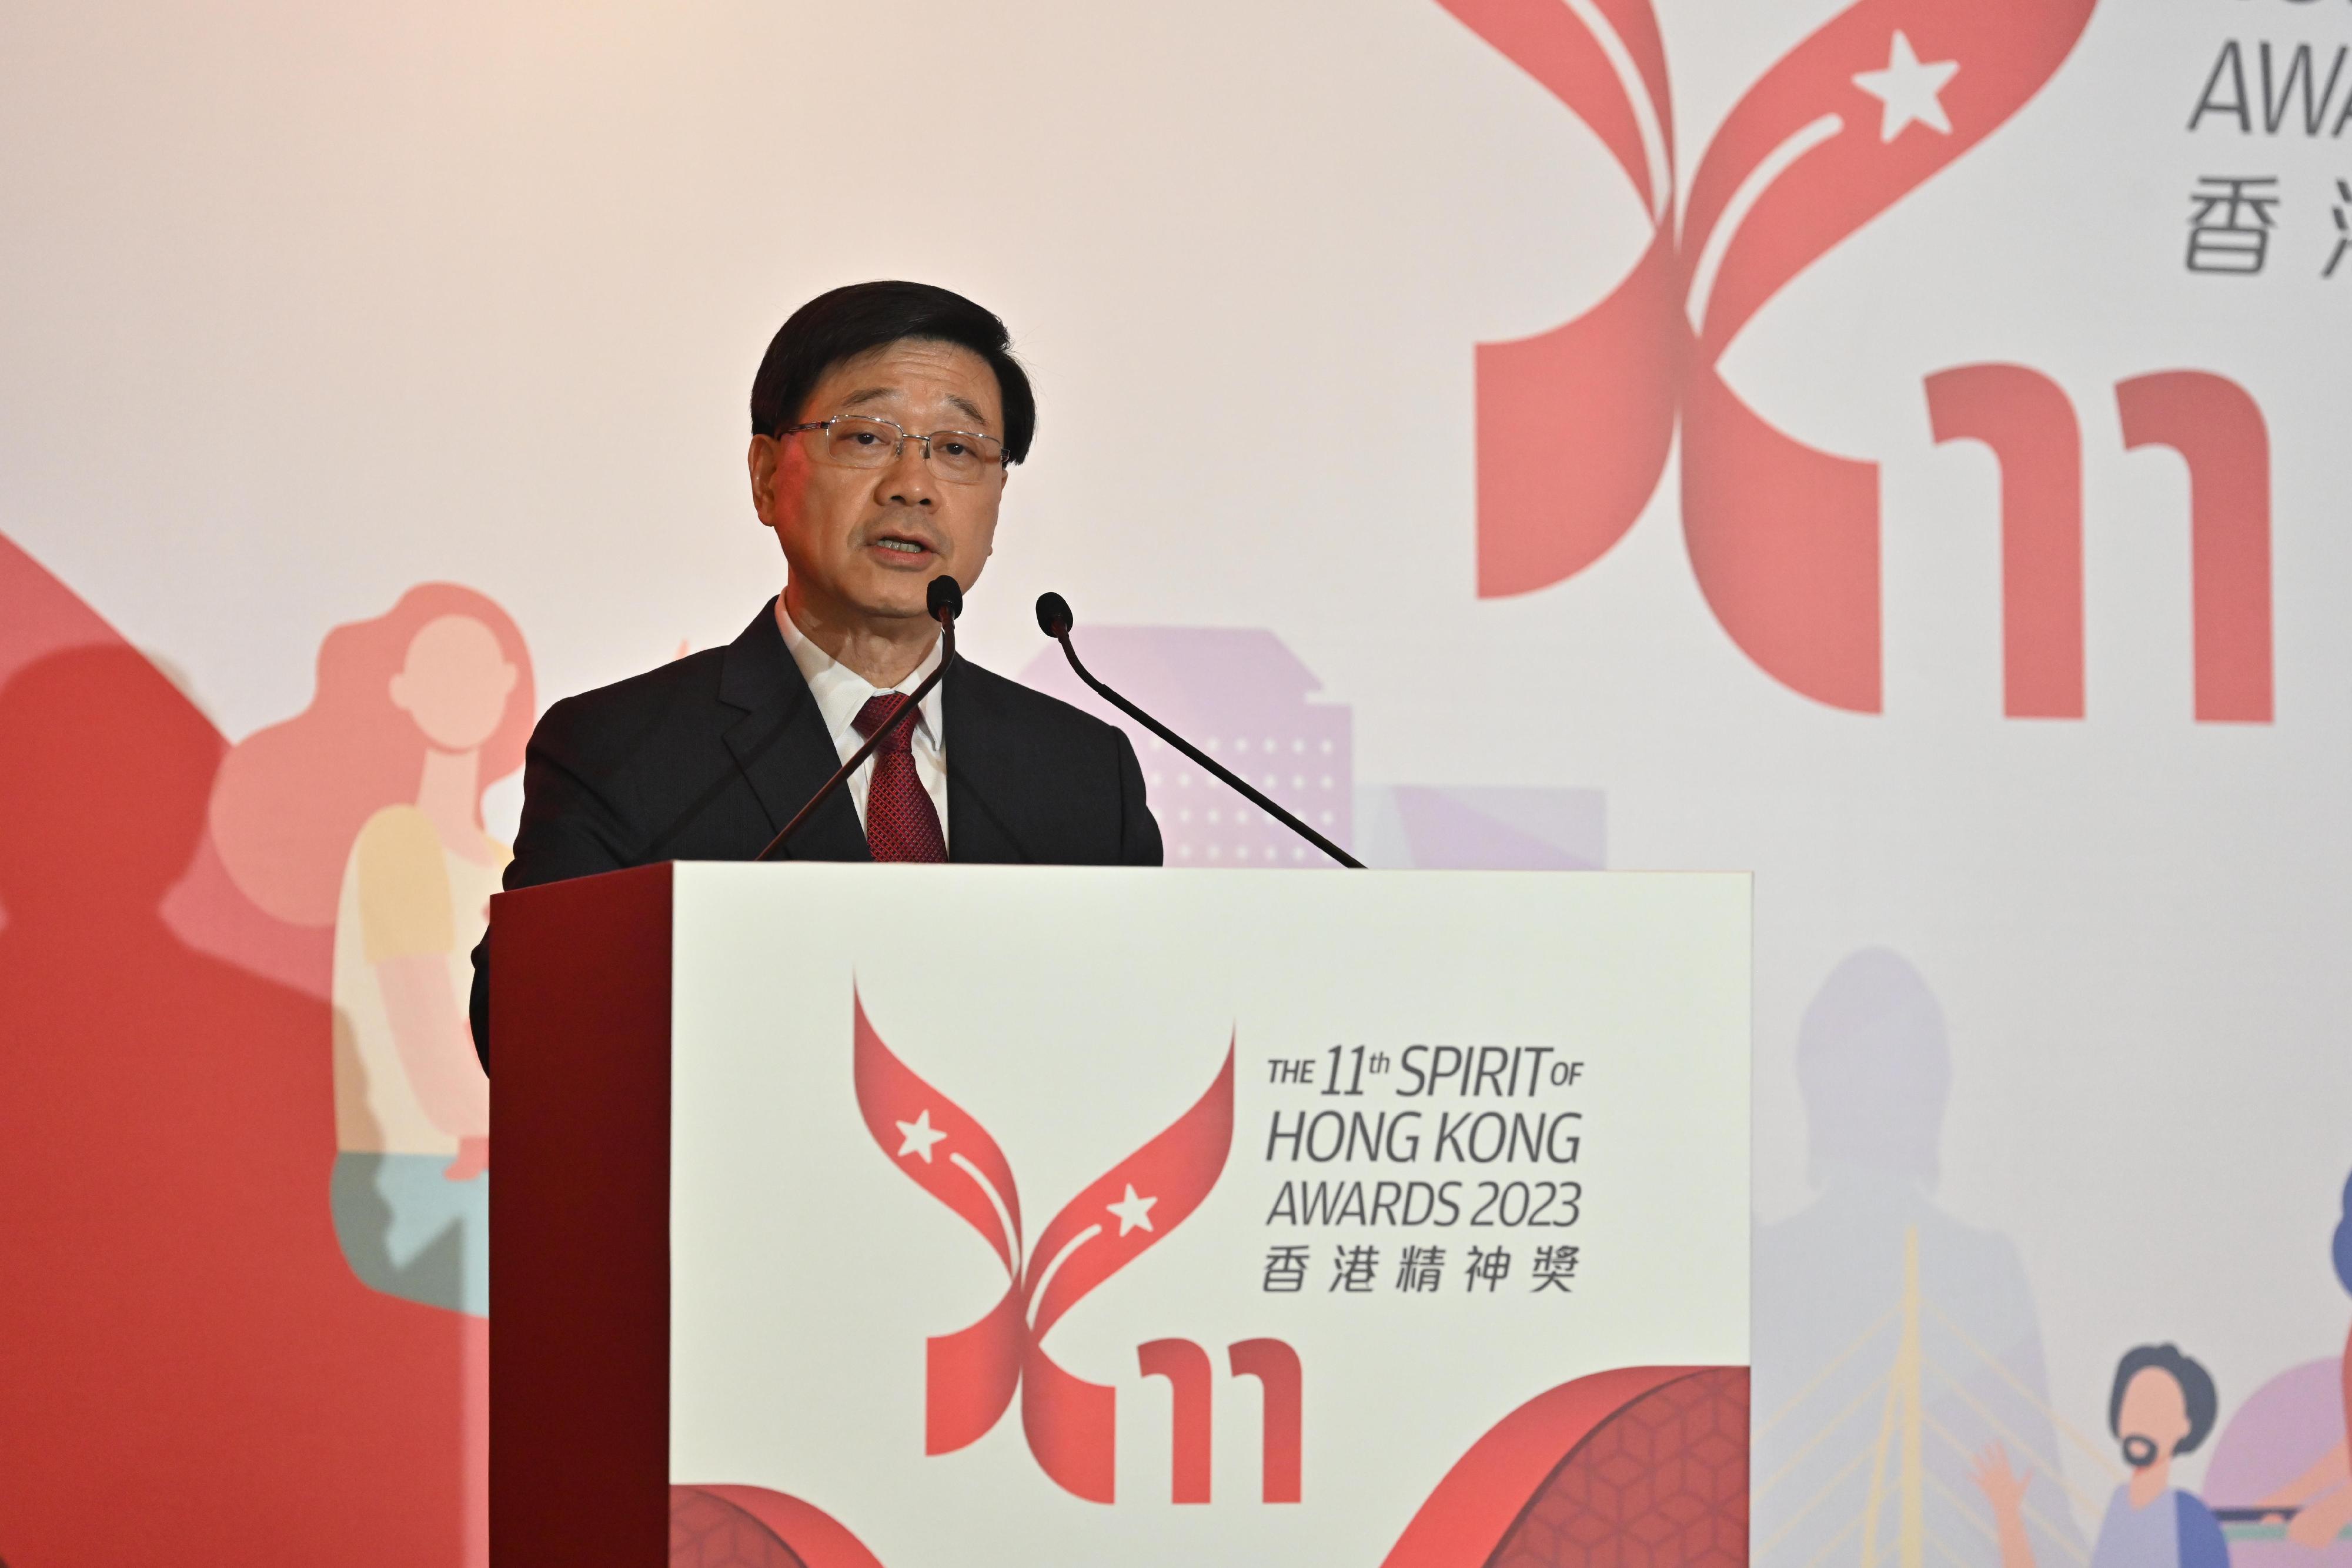 The Chief Executive, Mr John Lee, speaks at the 11th Spirit of Hong Kong Awards 2023 today (December 1).